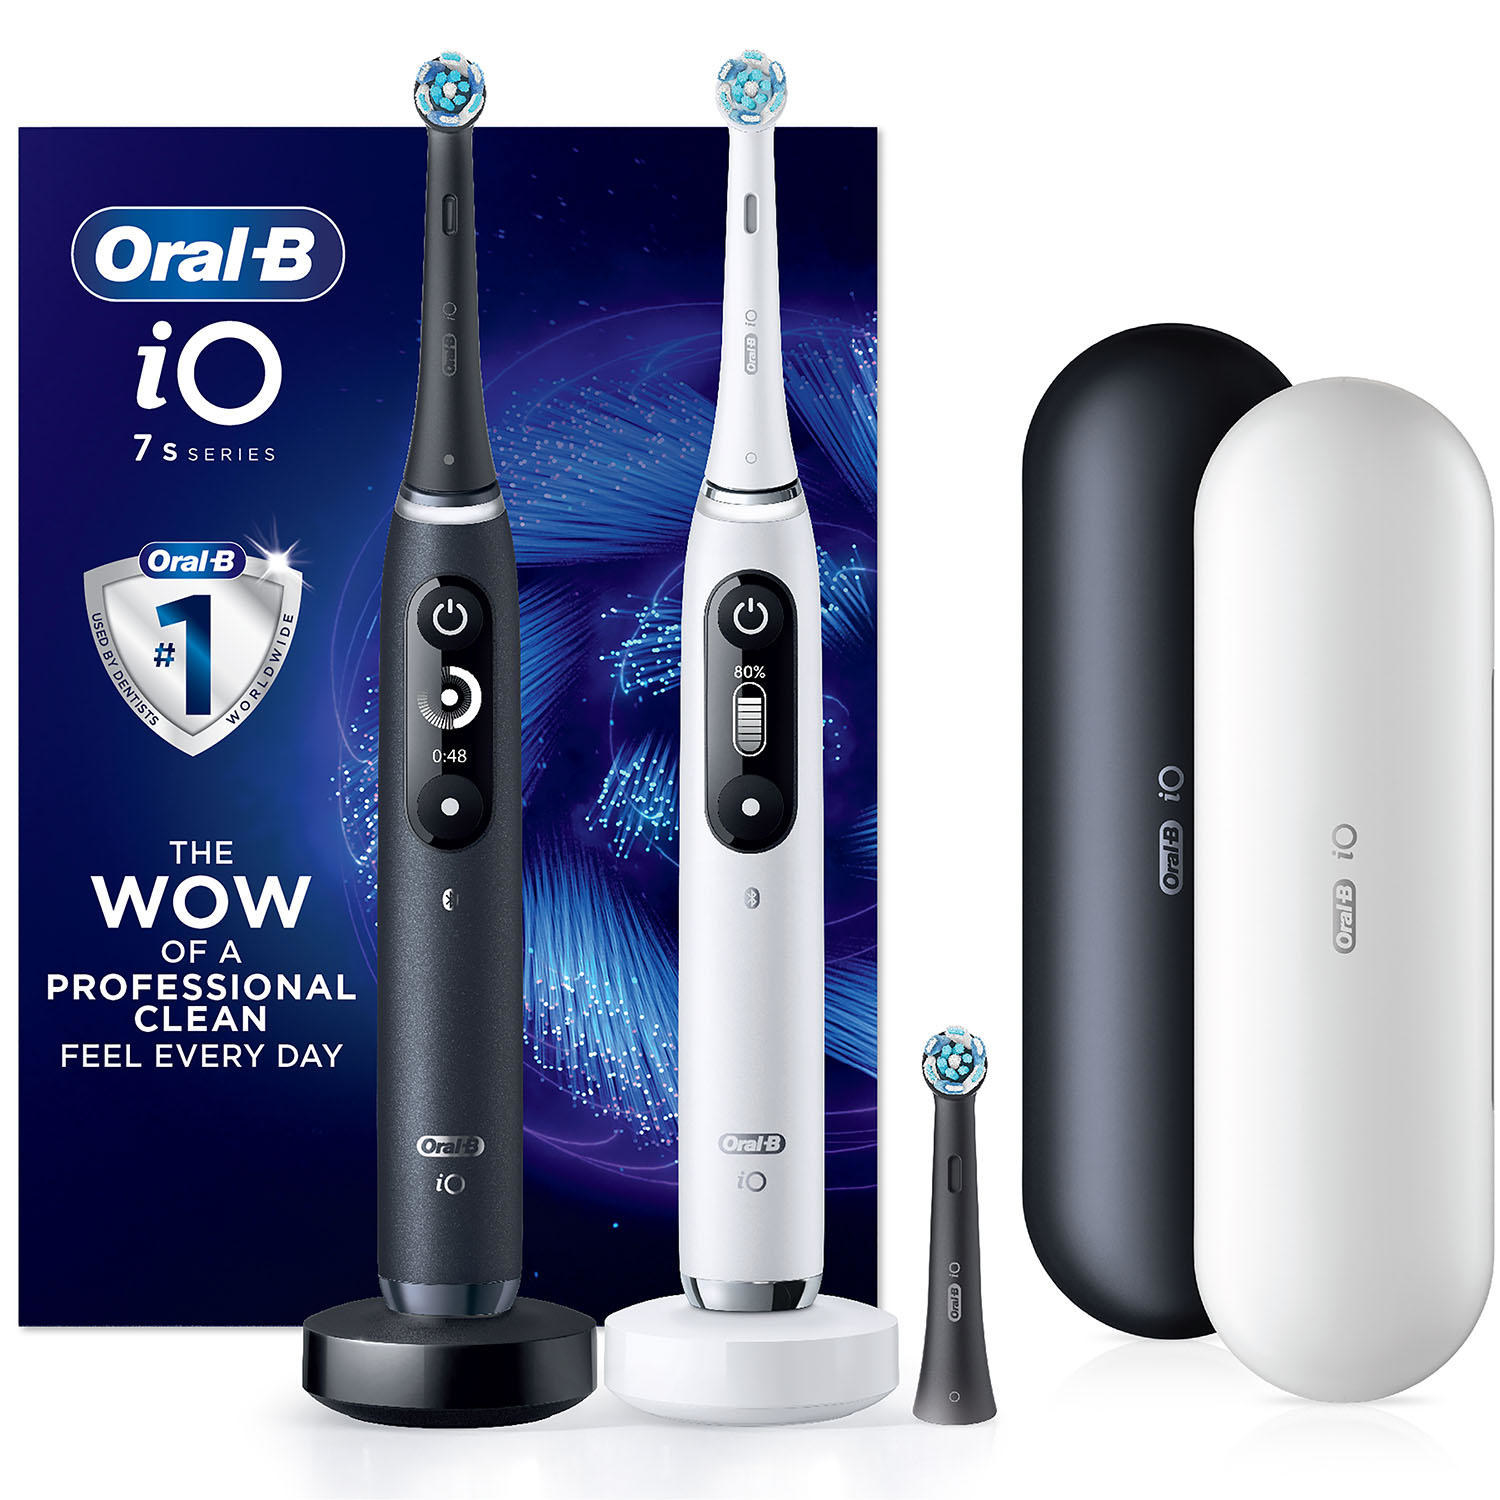 Black and white Oral-B toothbrushes on their stands side by side with their travel cases